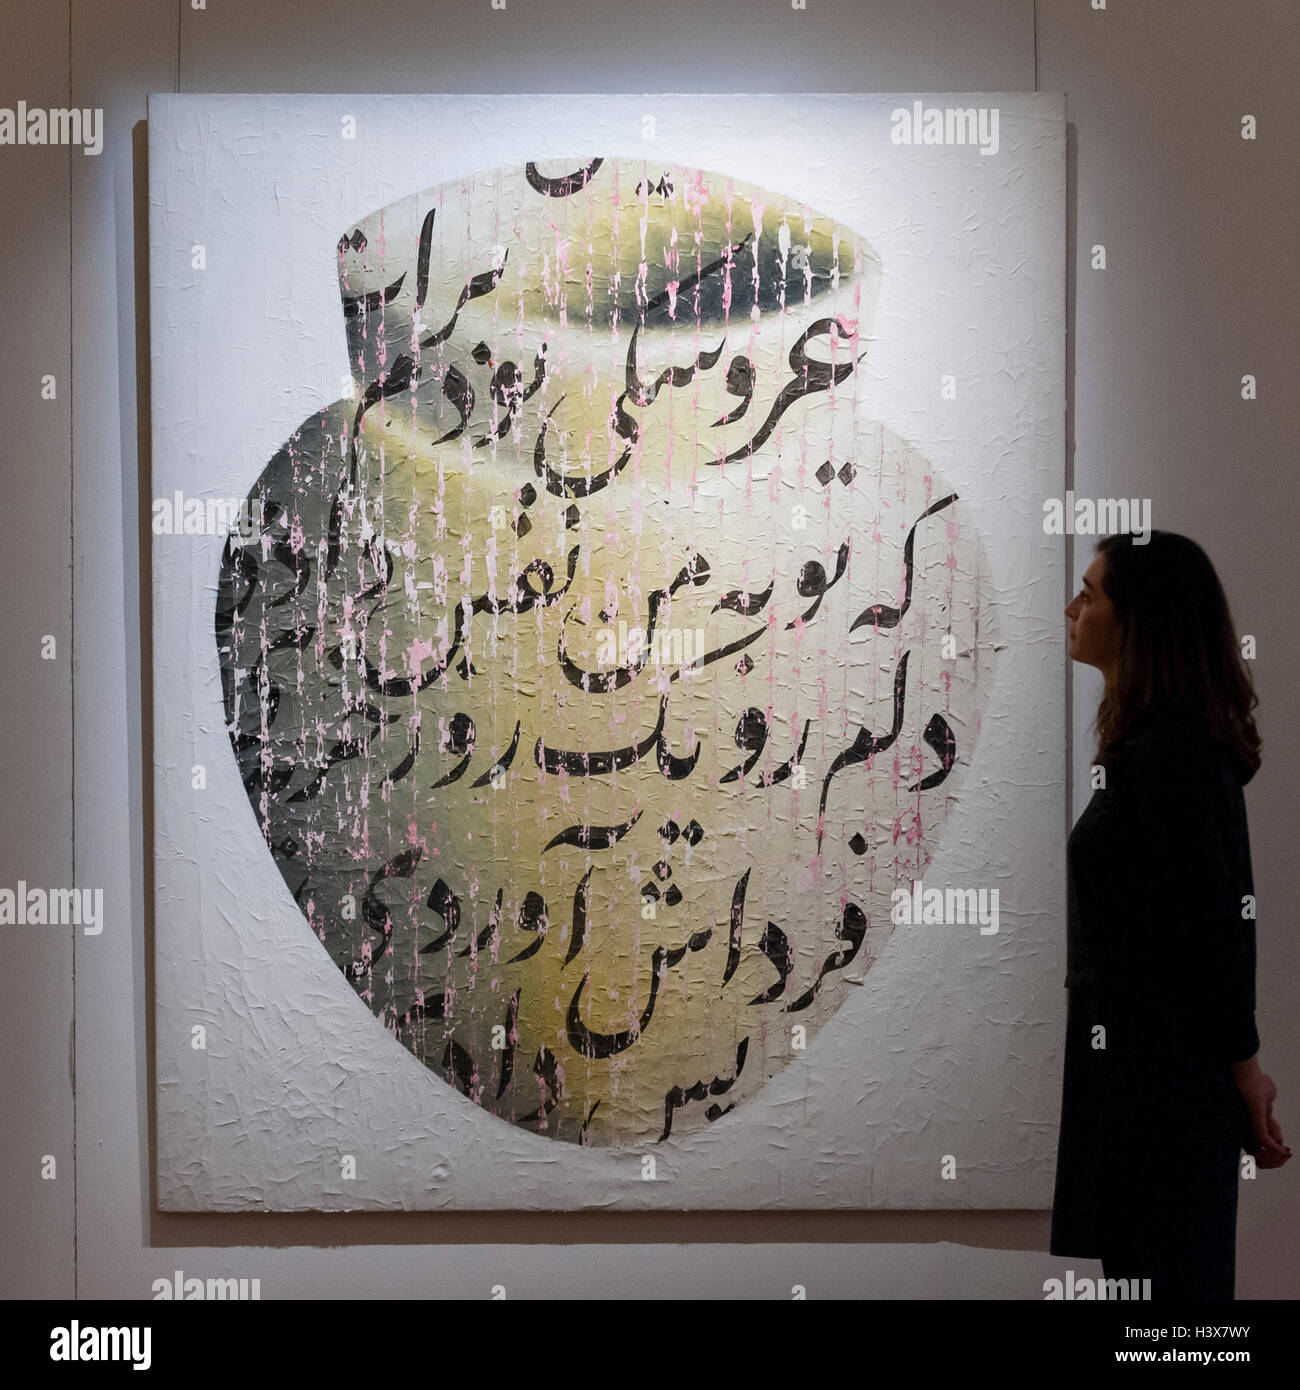 London, UK.  13 October 2016. A Sotheby's staff member views 'For You I Was a Puppet, You Gave Me Breath ... , 2003' by Farhad Moshiri (est. GBP 80-100k) at the preview of Sotheby's Art of the Middle East and India exhibition, which presents artworks to be sold in New Bond Street in four sales in October covering Modern & Contemporary South Asian Art, 20th Century Middle Eastern Art, Arts of the Islamic World and items from the Khosrovani-Diba Collection. Credit:  Stephen Chung / Alamy Live News Stock Photo